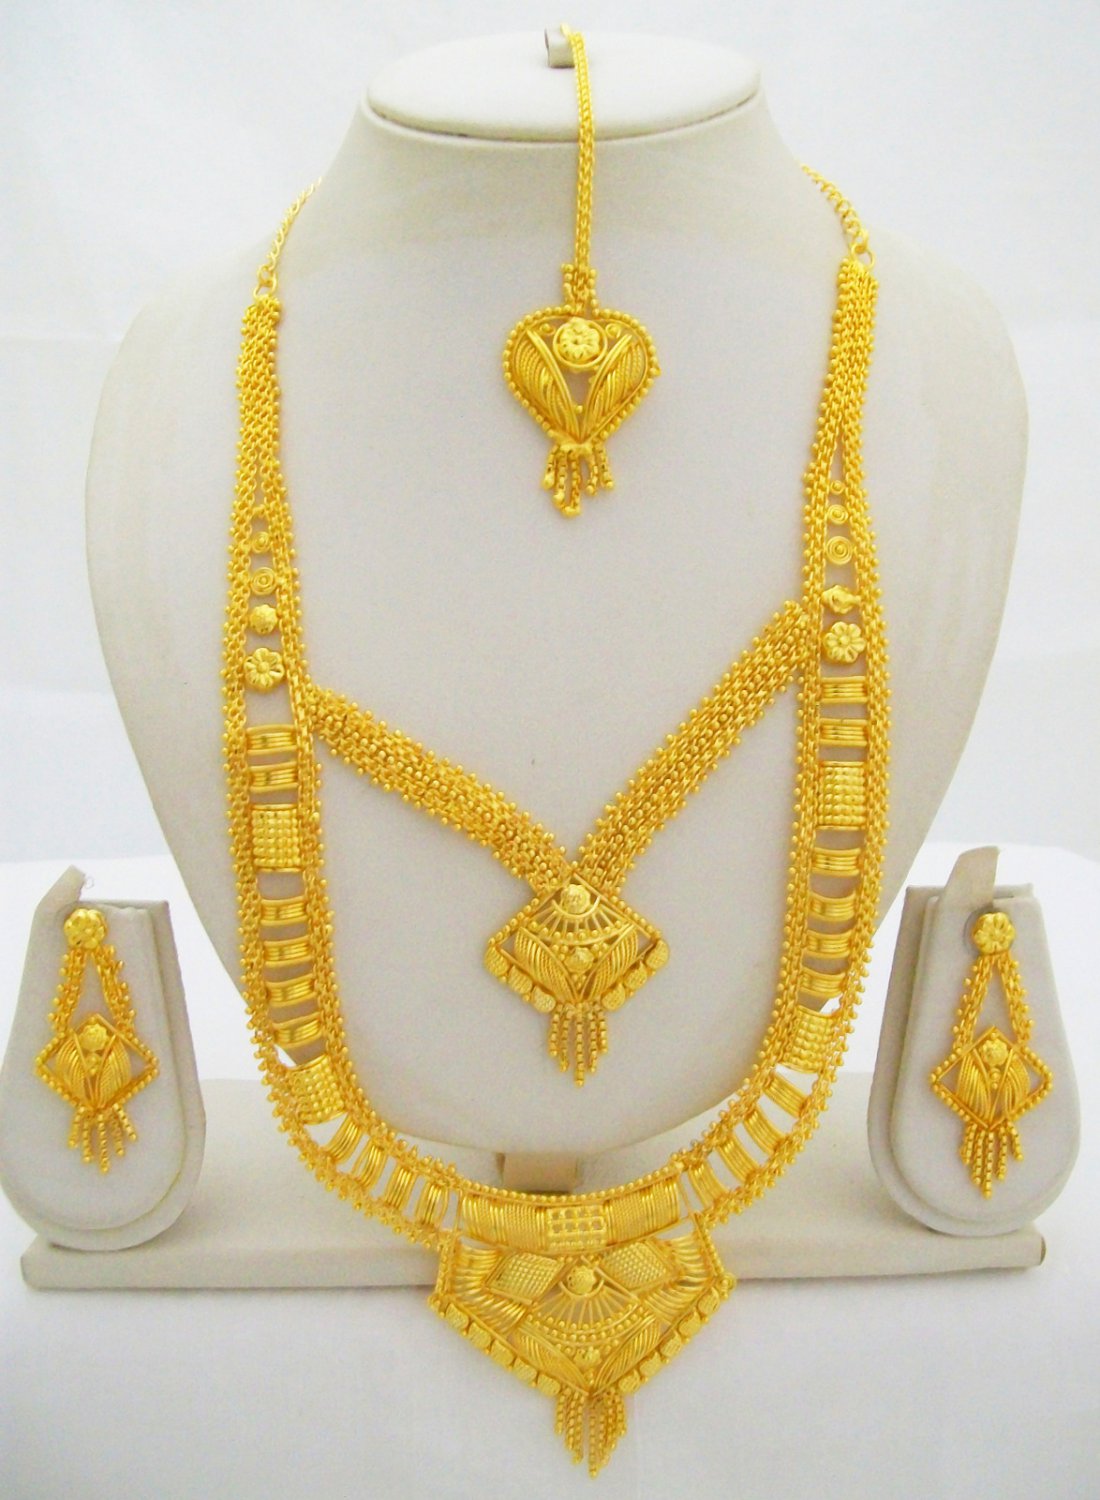 Gold Plated Indian Rani Haar Necklace Long Layered Ethnic Jewellery Set 6Pc